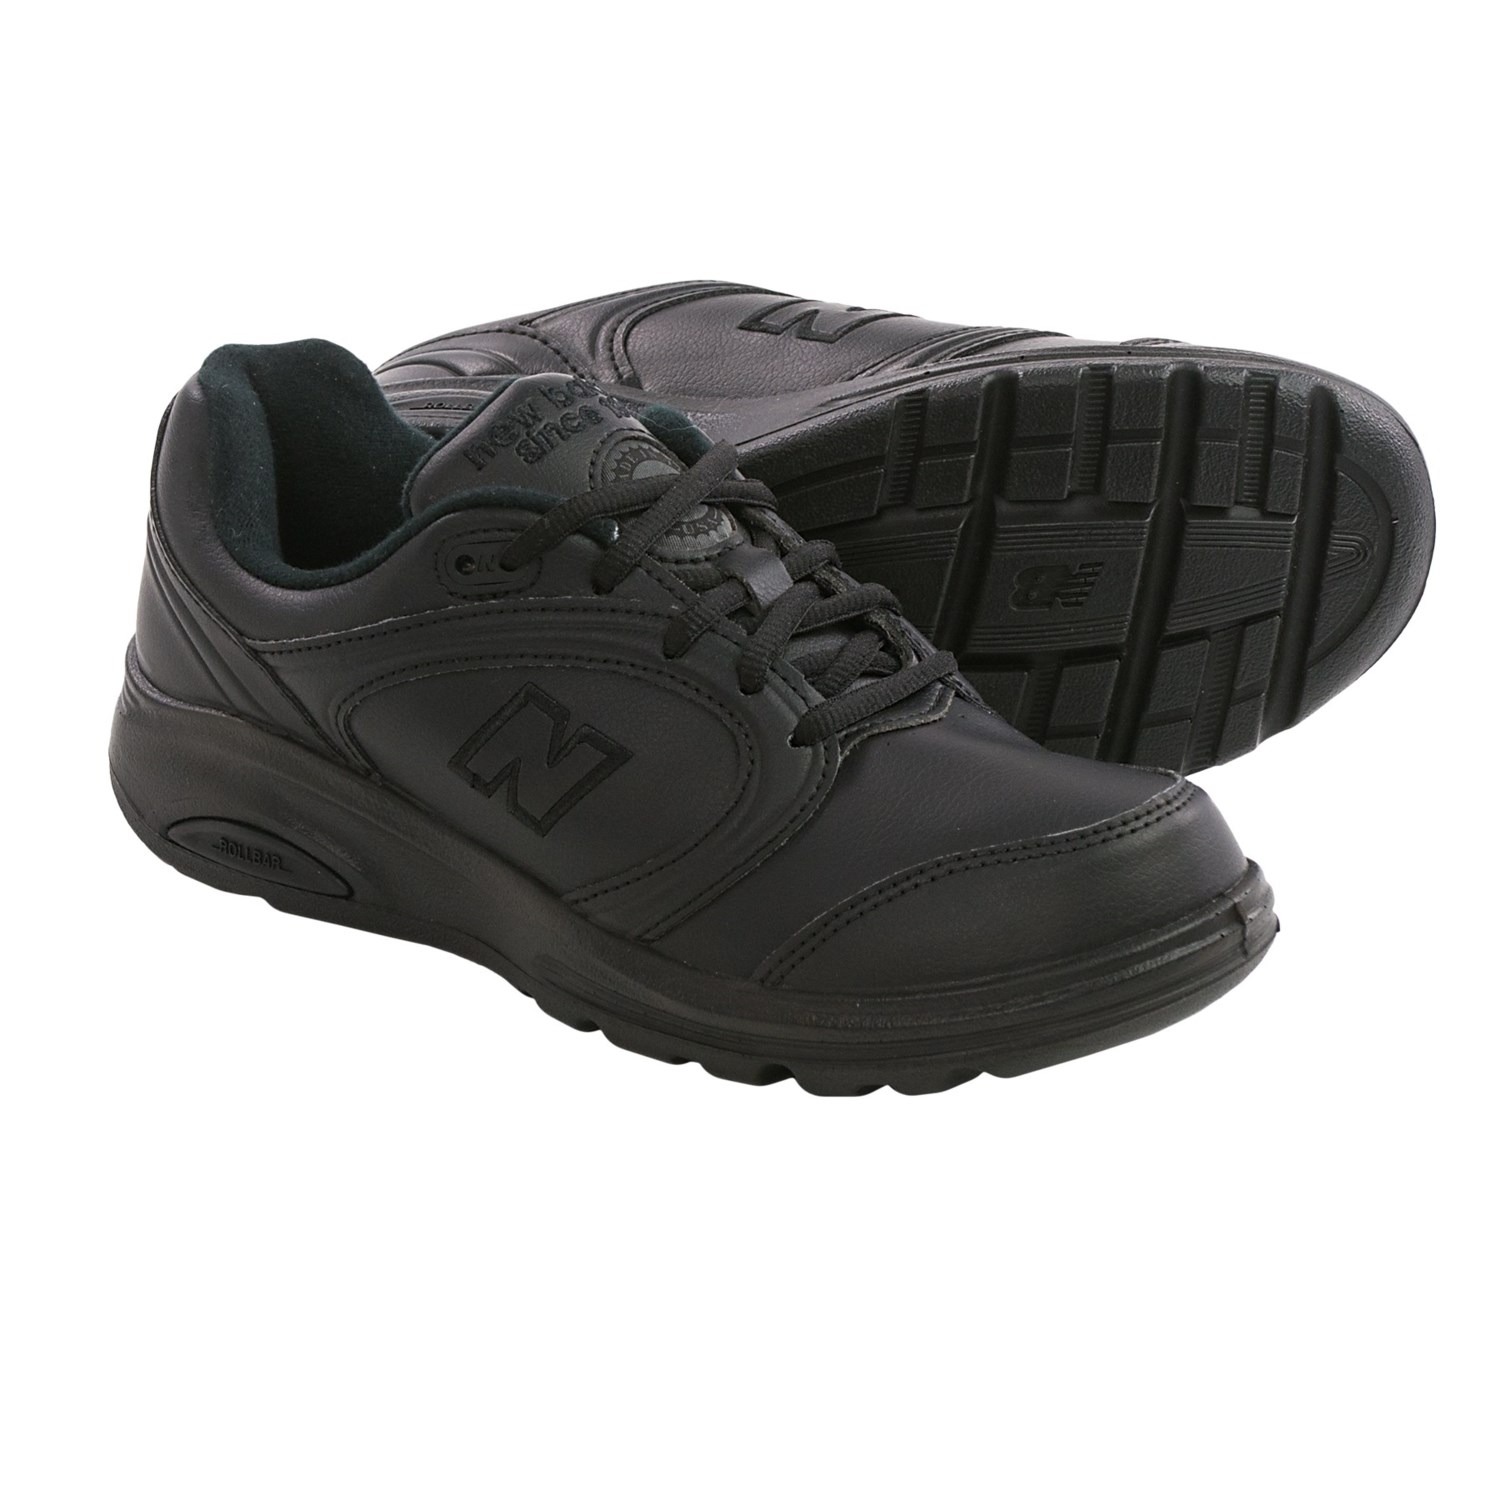 New Balance 812 Walking Shoes (For Women) 9923F - Save 52%